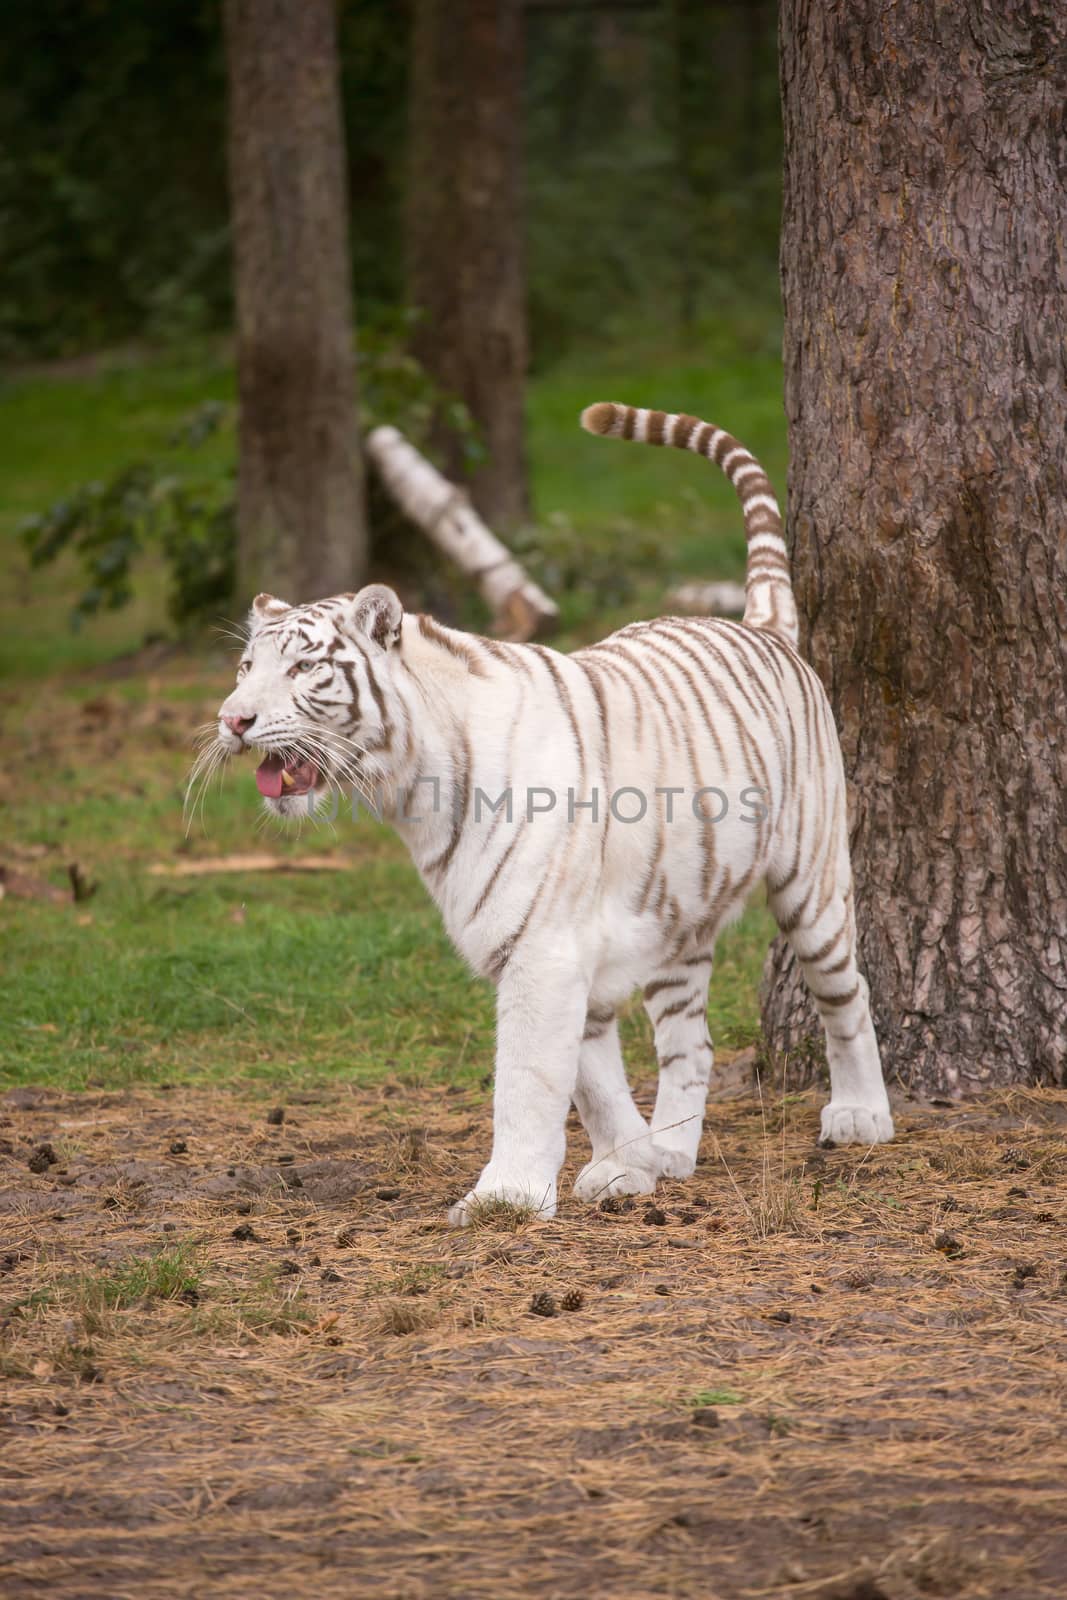 A beautiful white tiger out in the nature